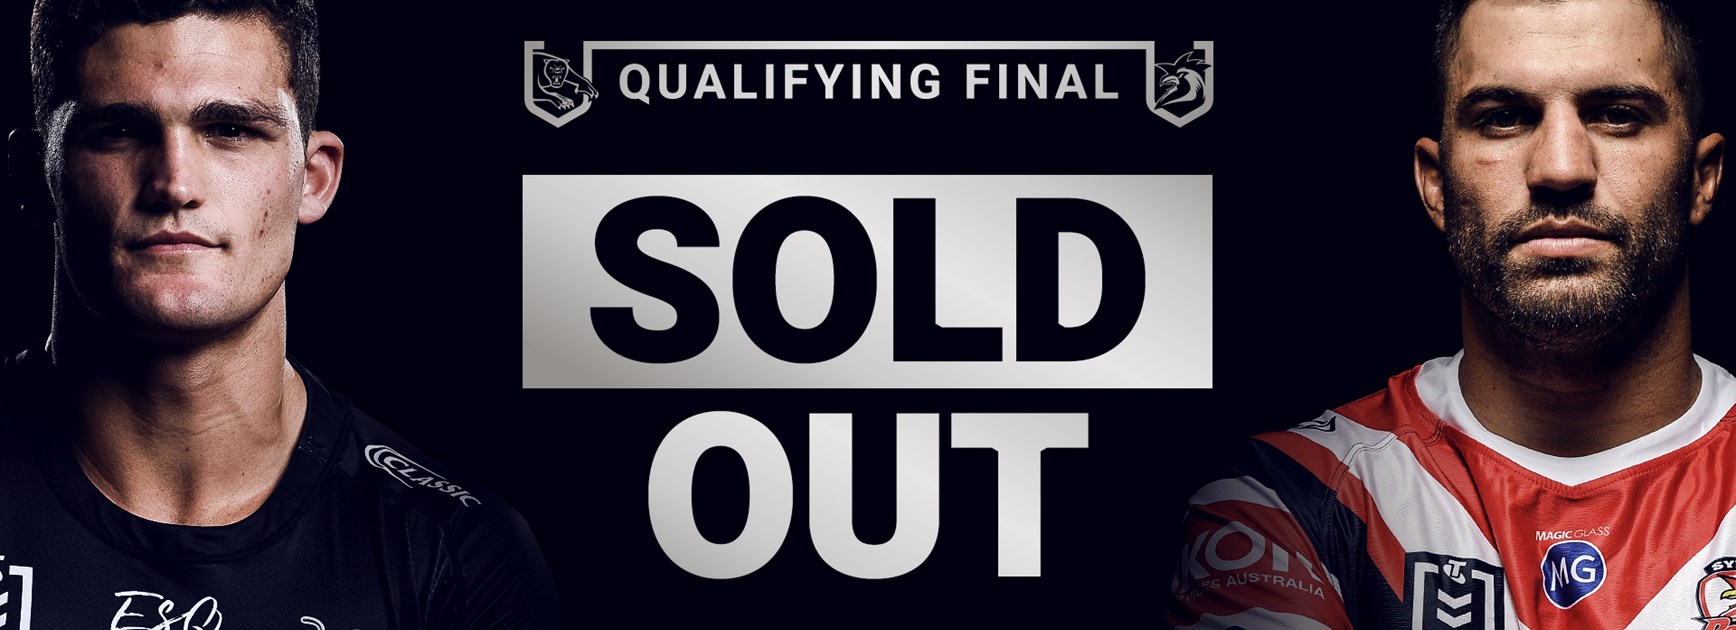 Qualifying Finals Match Sold Out